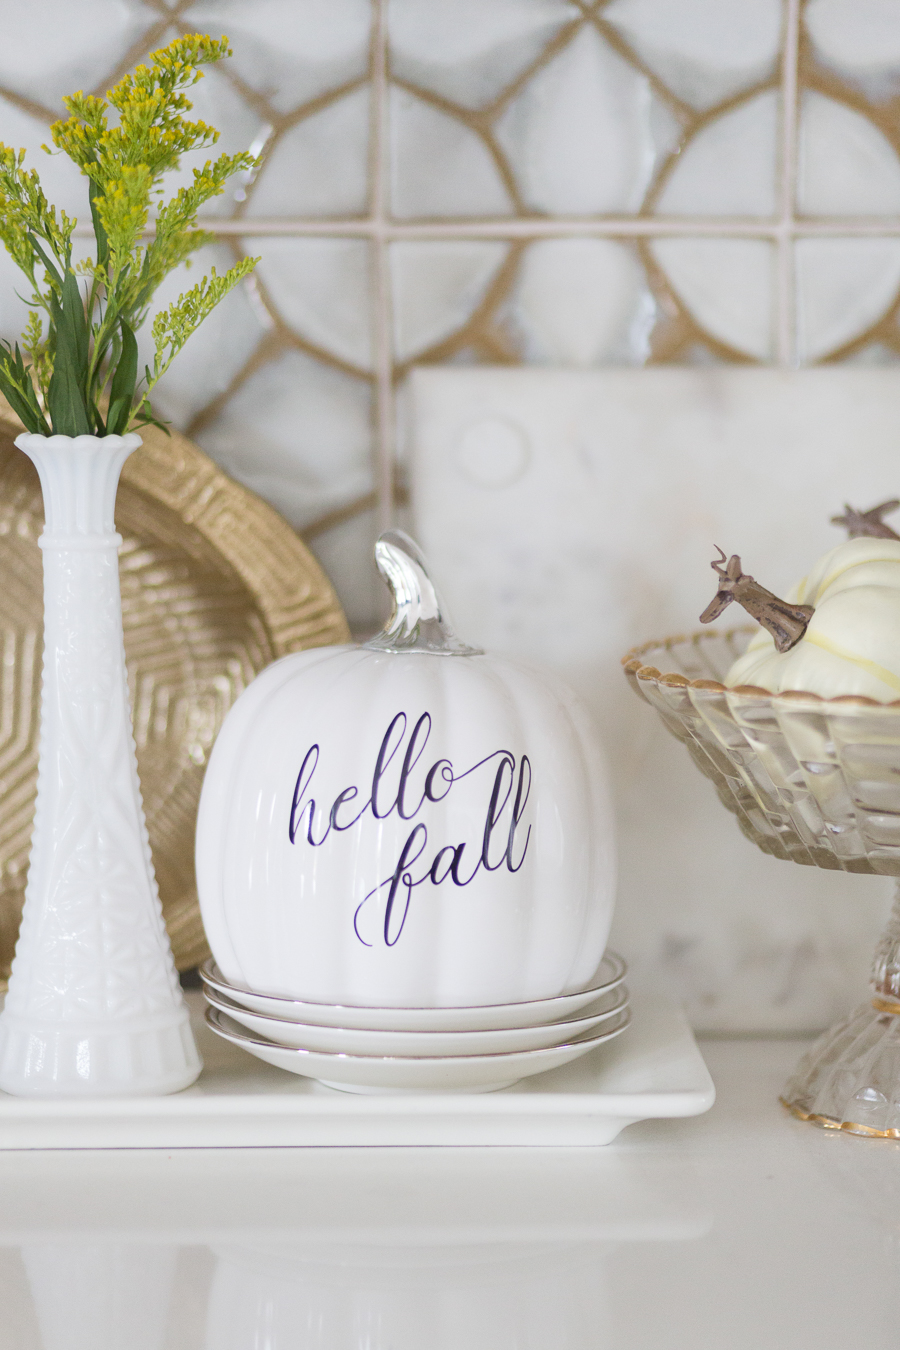 Loveliest Looks of Fall Home Tour Beautiful Fall Home Decor and Fall Fashion Ideas hello fall ceramic white pumpkin sitting on top of white plates with a cake glass dish full of white pumpkins next to it in front of patterned honeycomb ann sacks tile backsplash in a white kitchen